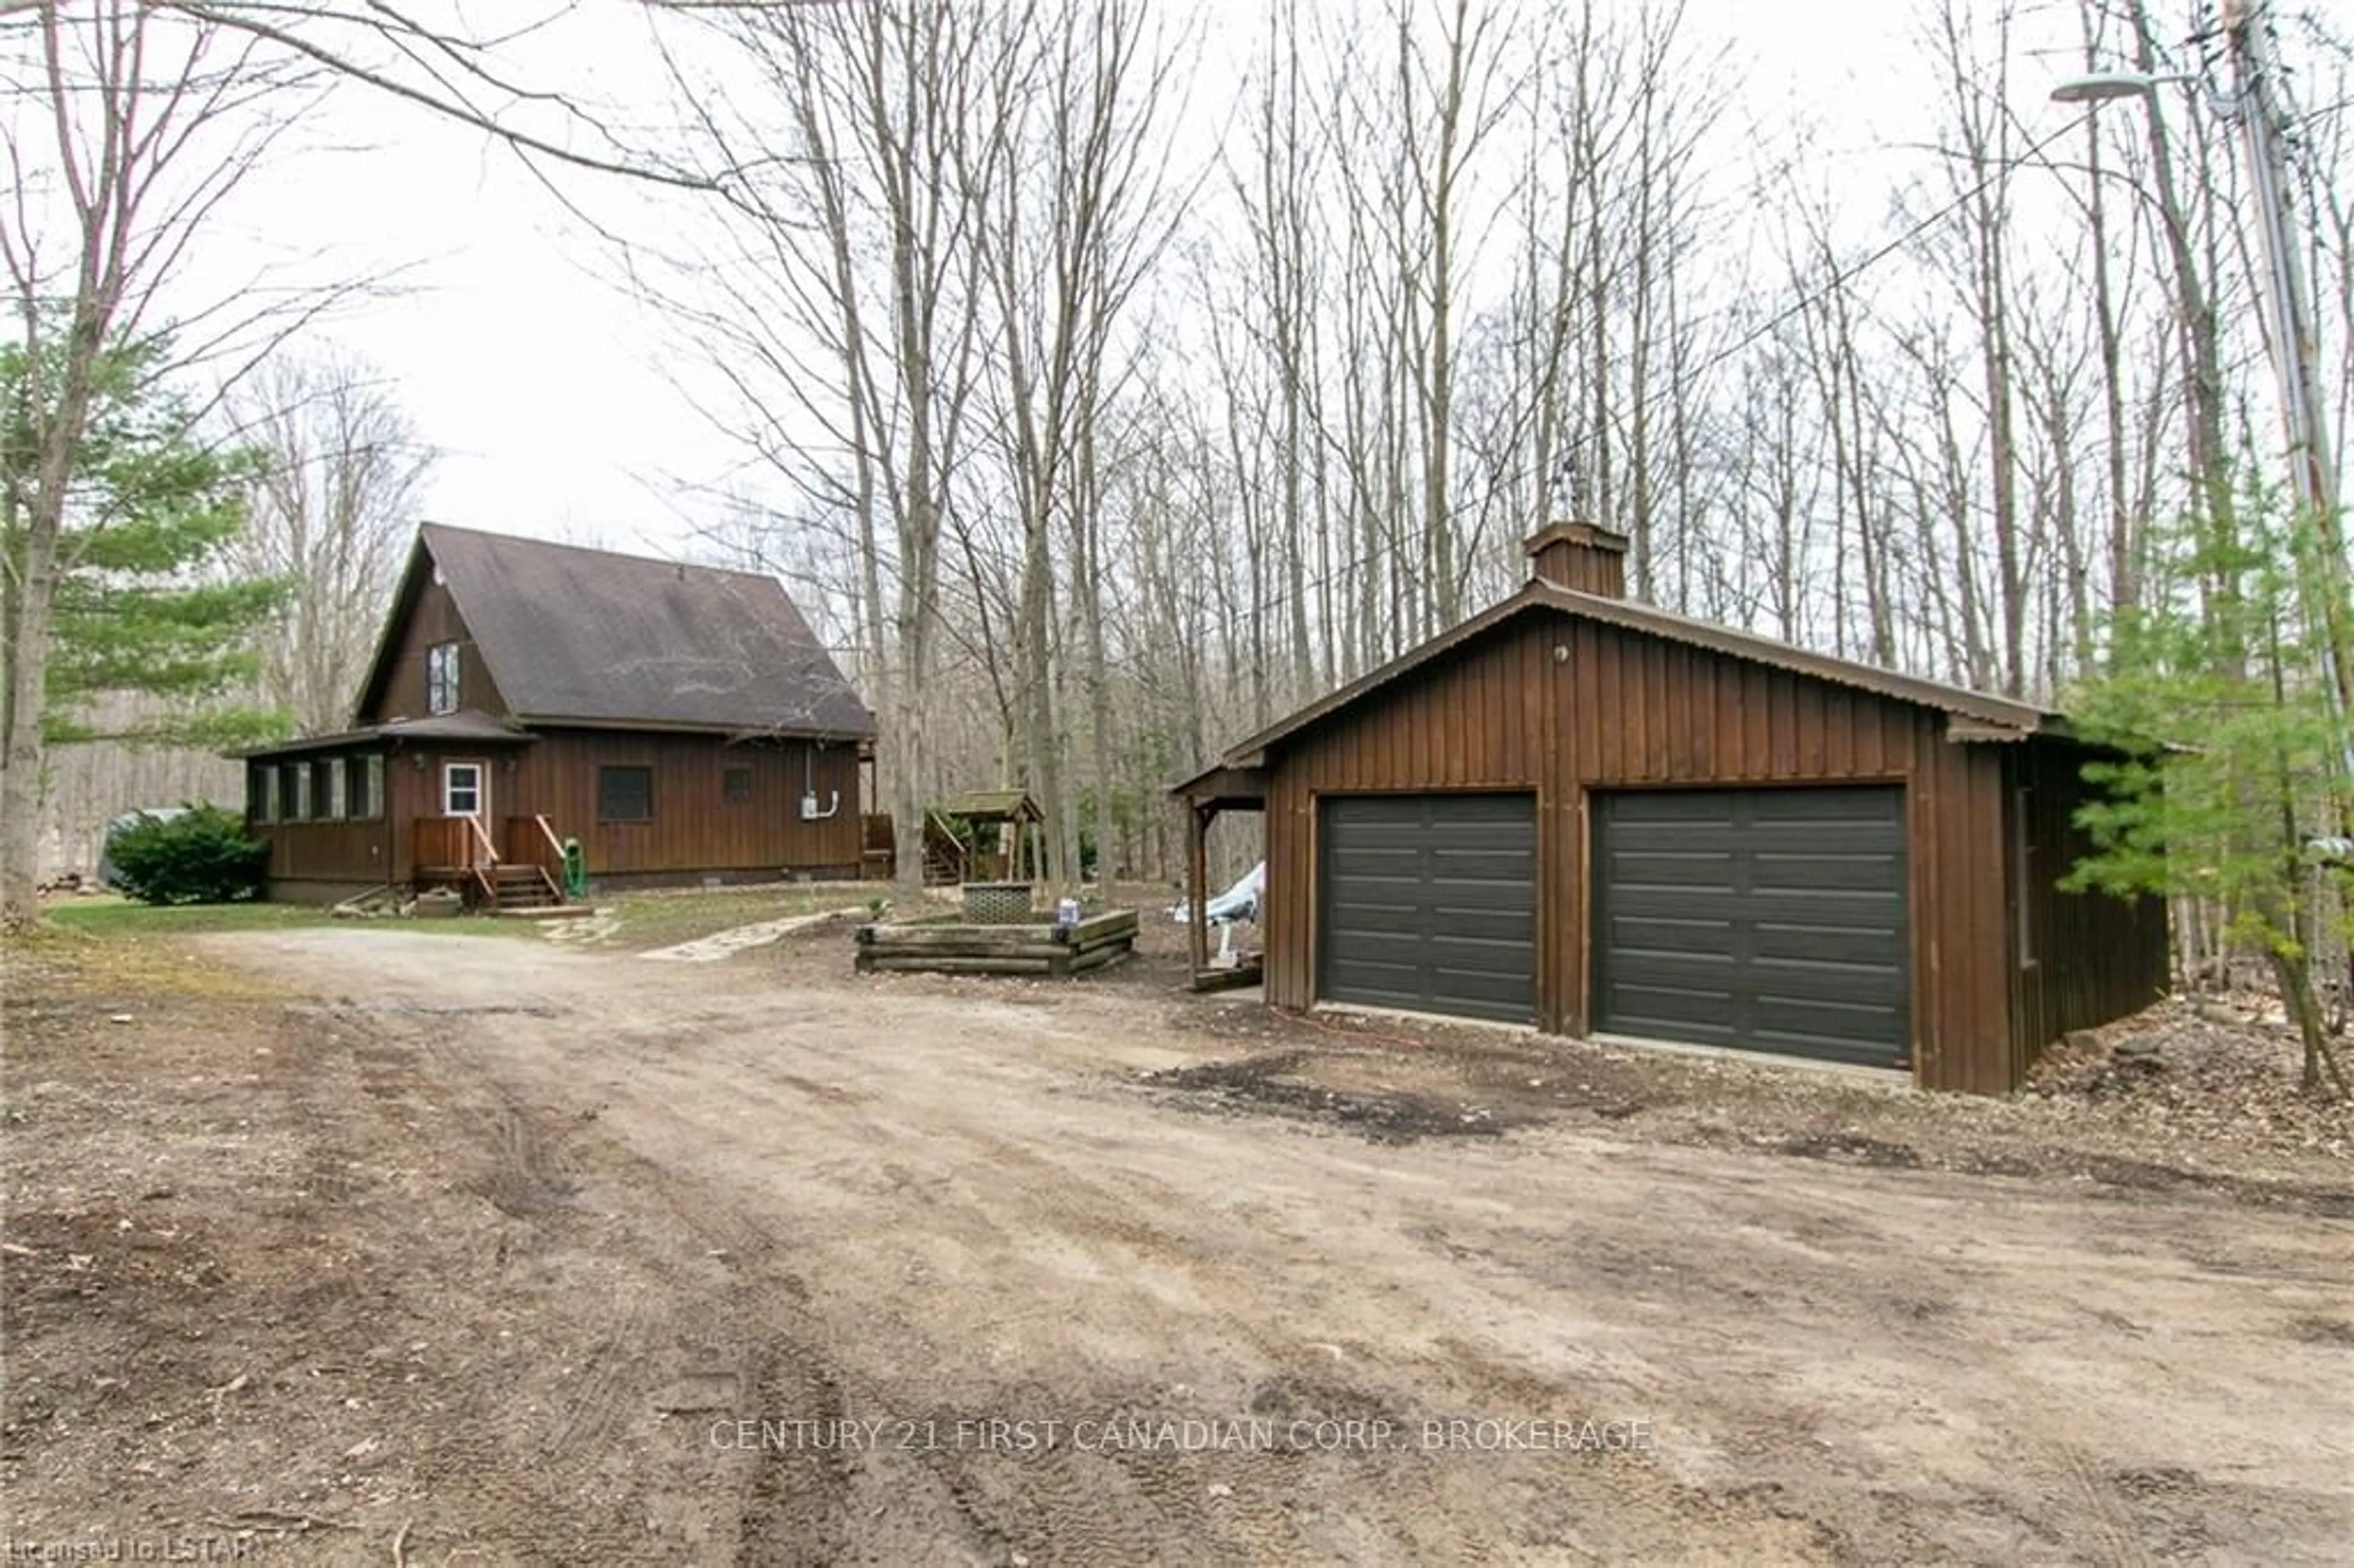 Cottage for 2096 Bruce Road 9, Northern Bruce Peninsula Ontario N0H 1W0